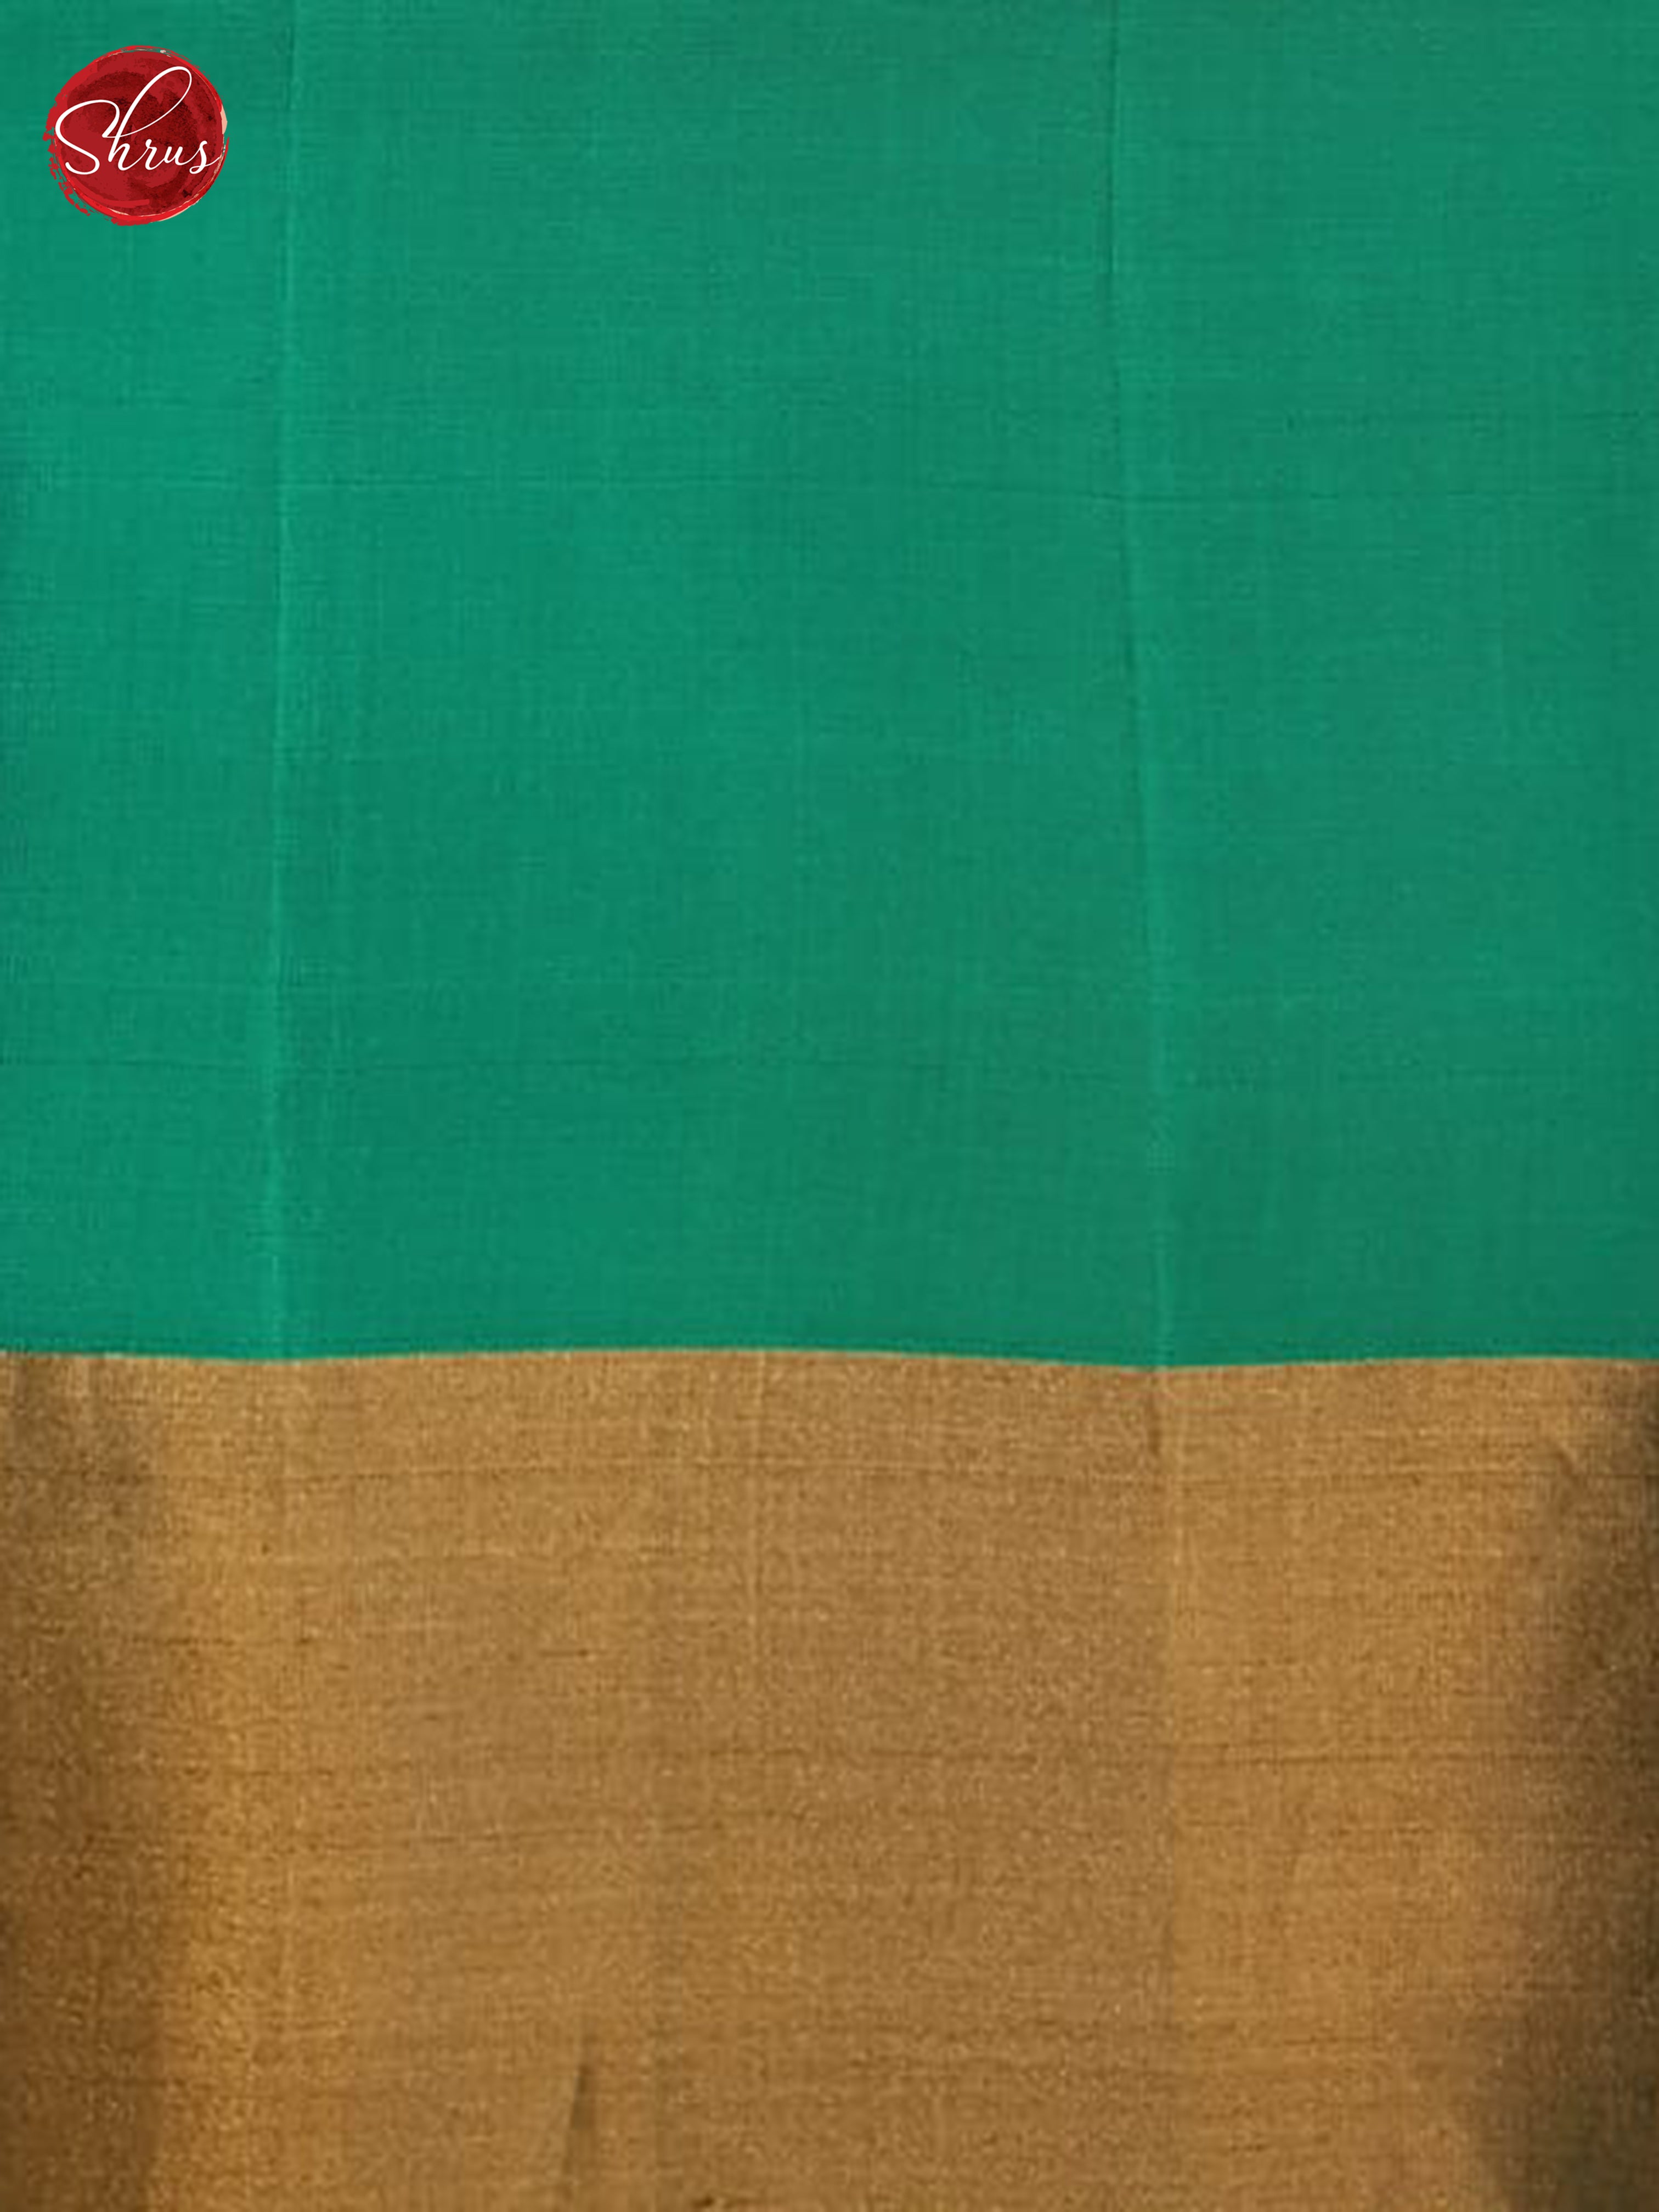 Dusty Brown And Green - Shop on ShrusEternity.com